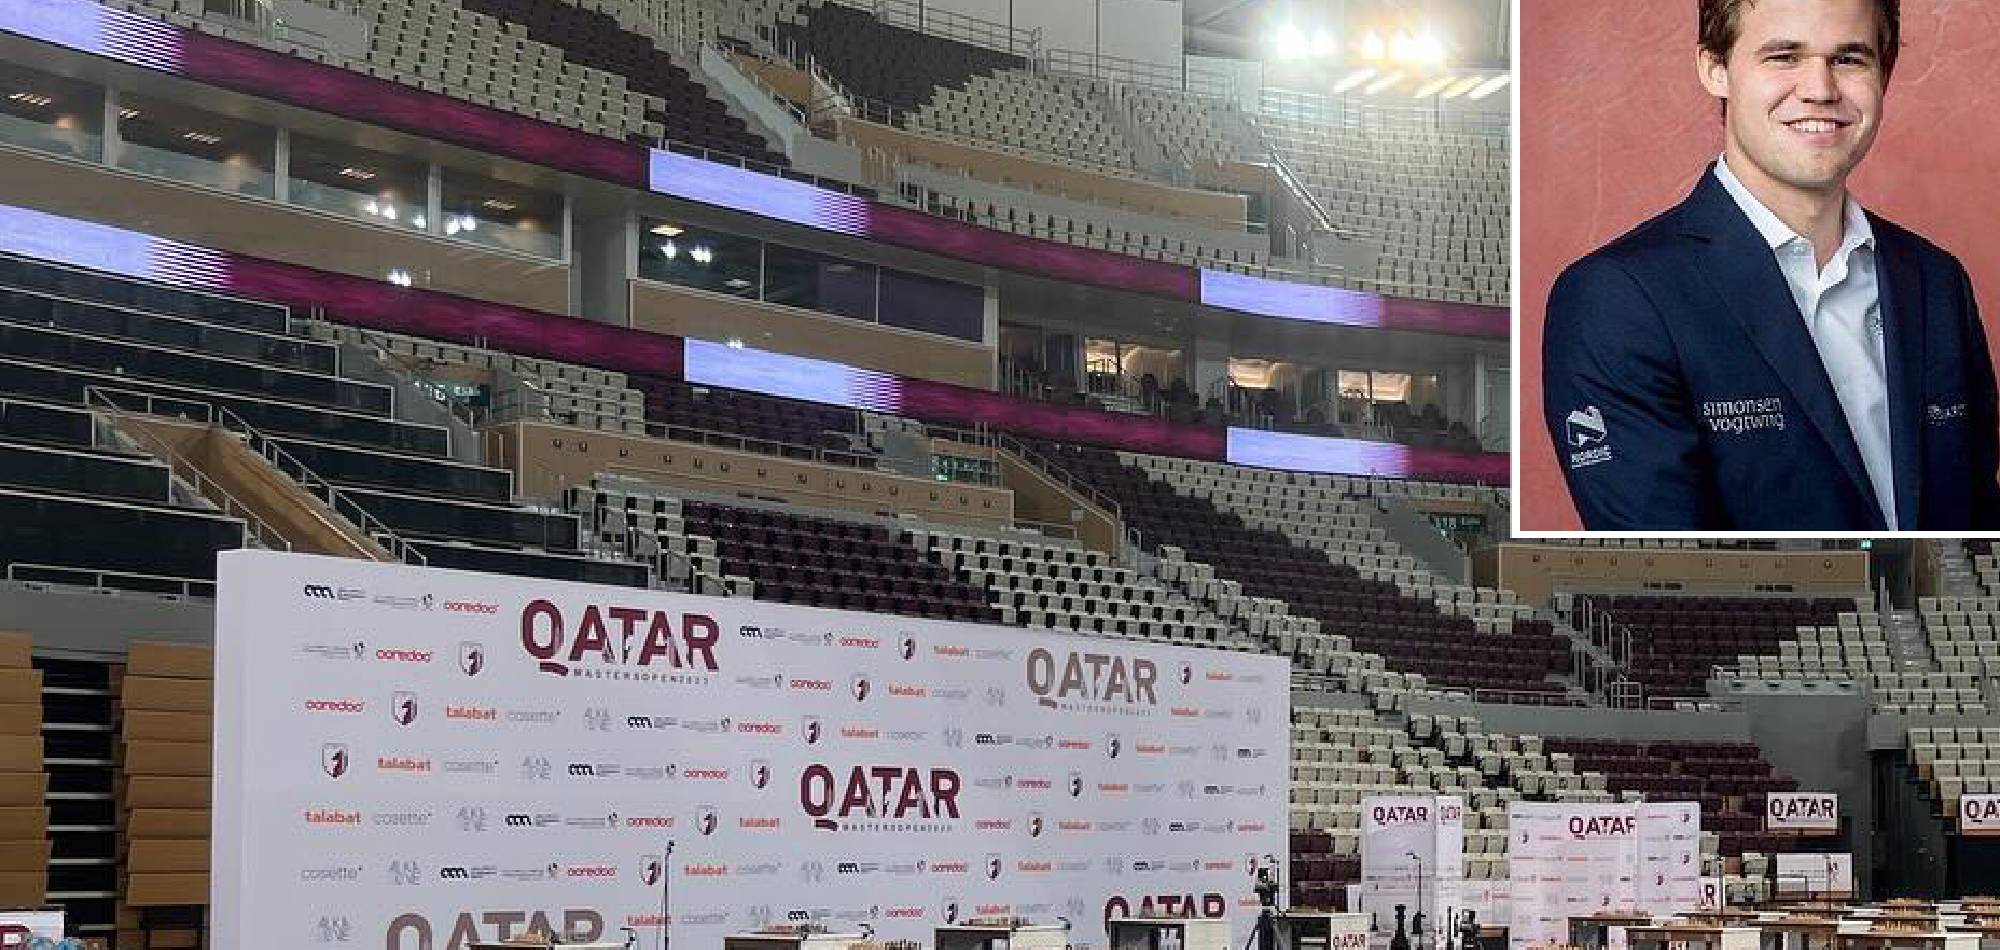 The Star-Studded Entry of the Qatar Masters 2023 feat. Magnus, Hikaru,  Anish, Gukesh 